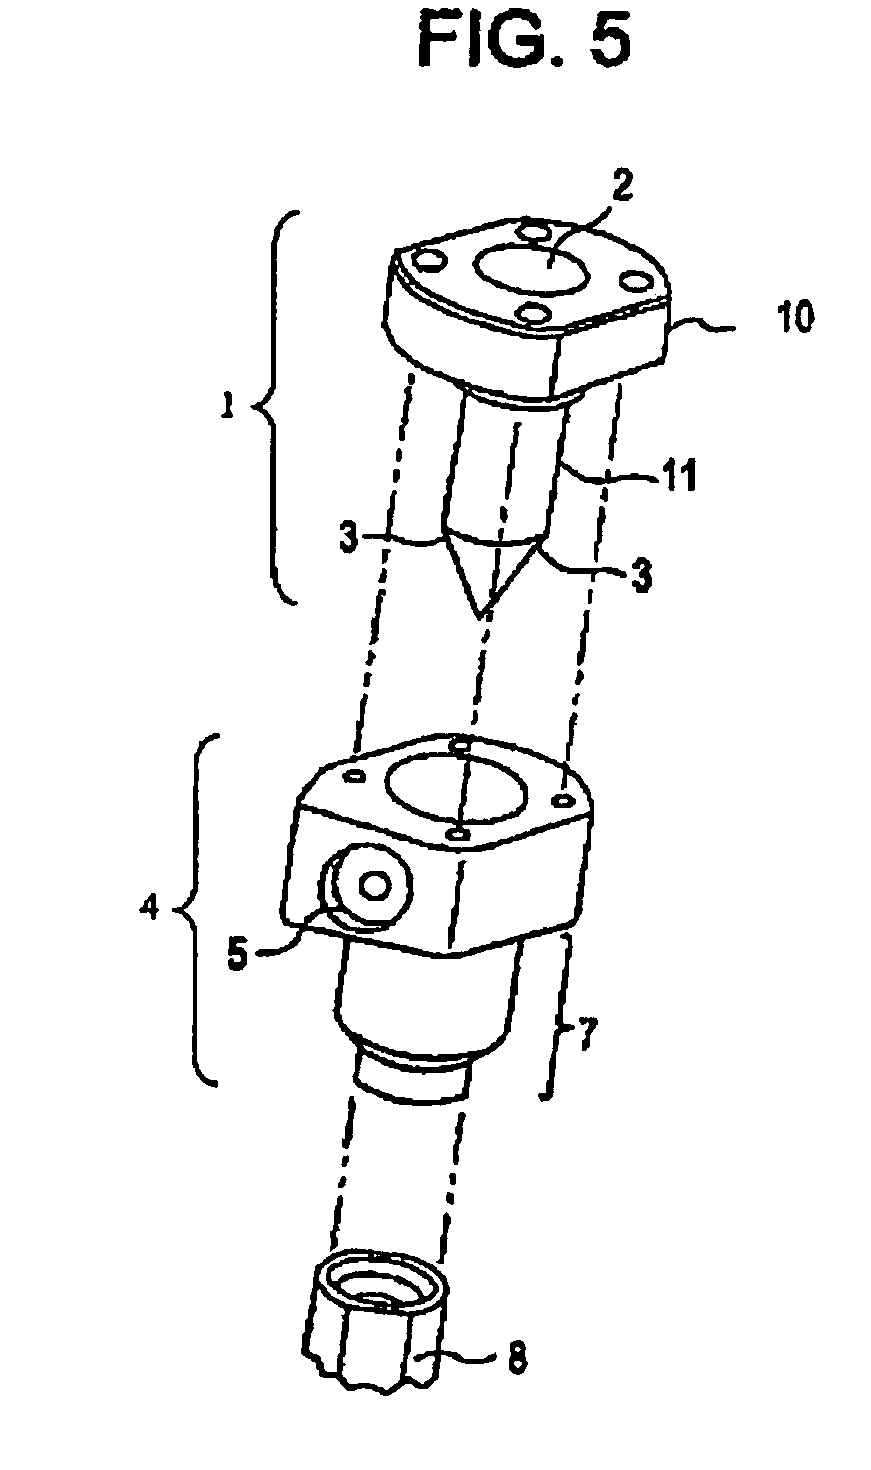 Method and arrangement for feeding chemicals into a papermaking process